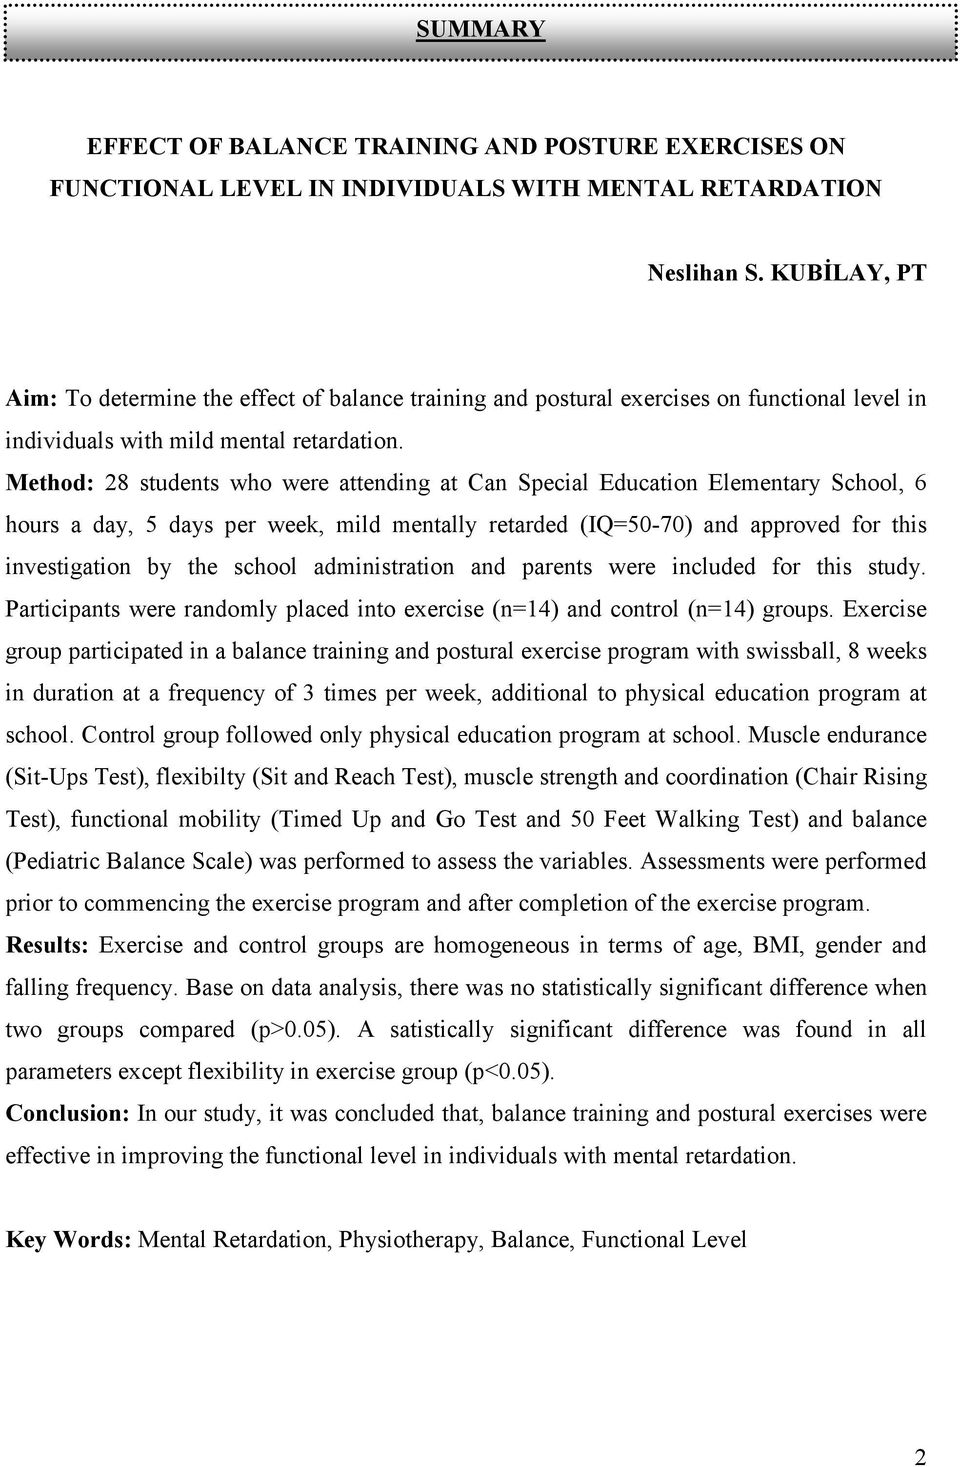 Method: 28 students who were attending at Can Special Education Elementary School, 6 hours a day, 5 days per week, mild mentally retarded (IQ=50-70) and approved for this investigation by the school